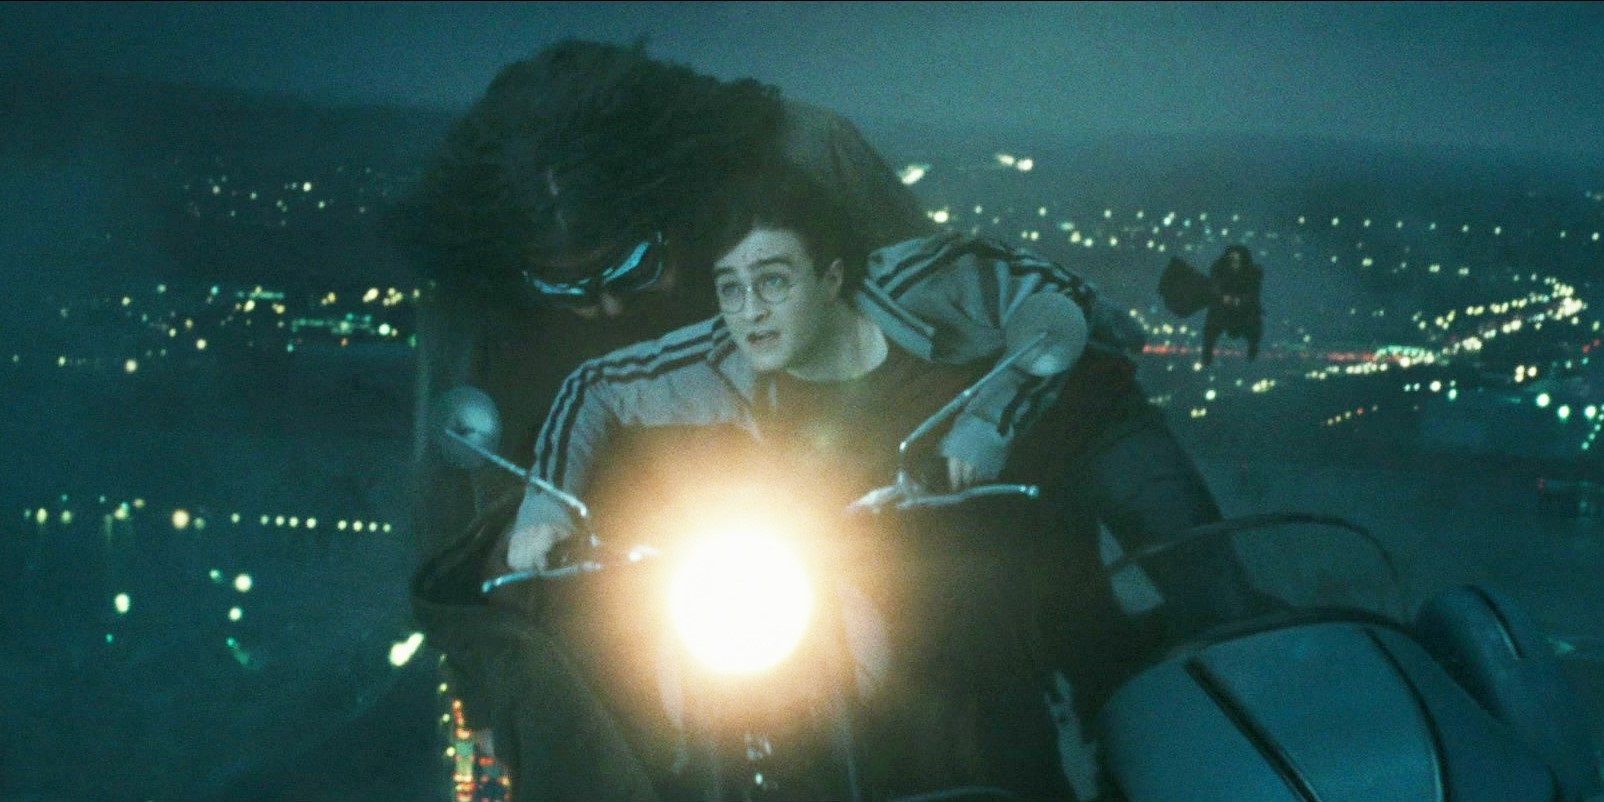 Harry and Hagrid trying to escape Death Eaters in The Deathly Hallows